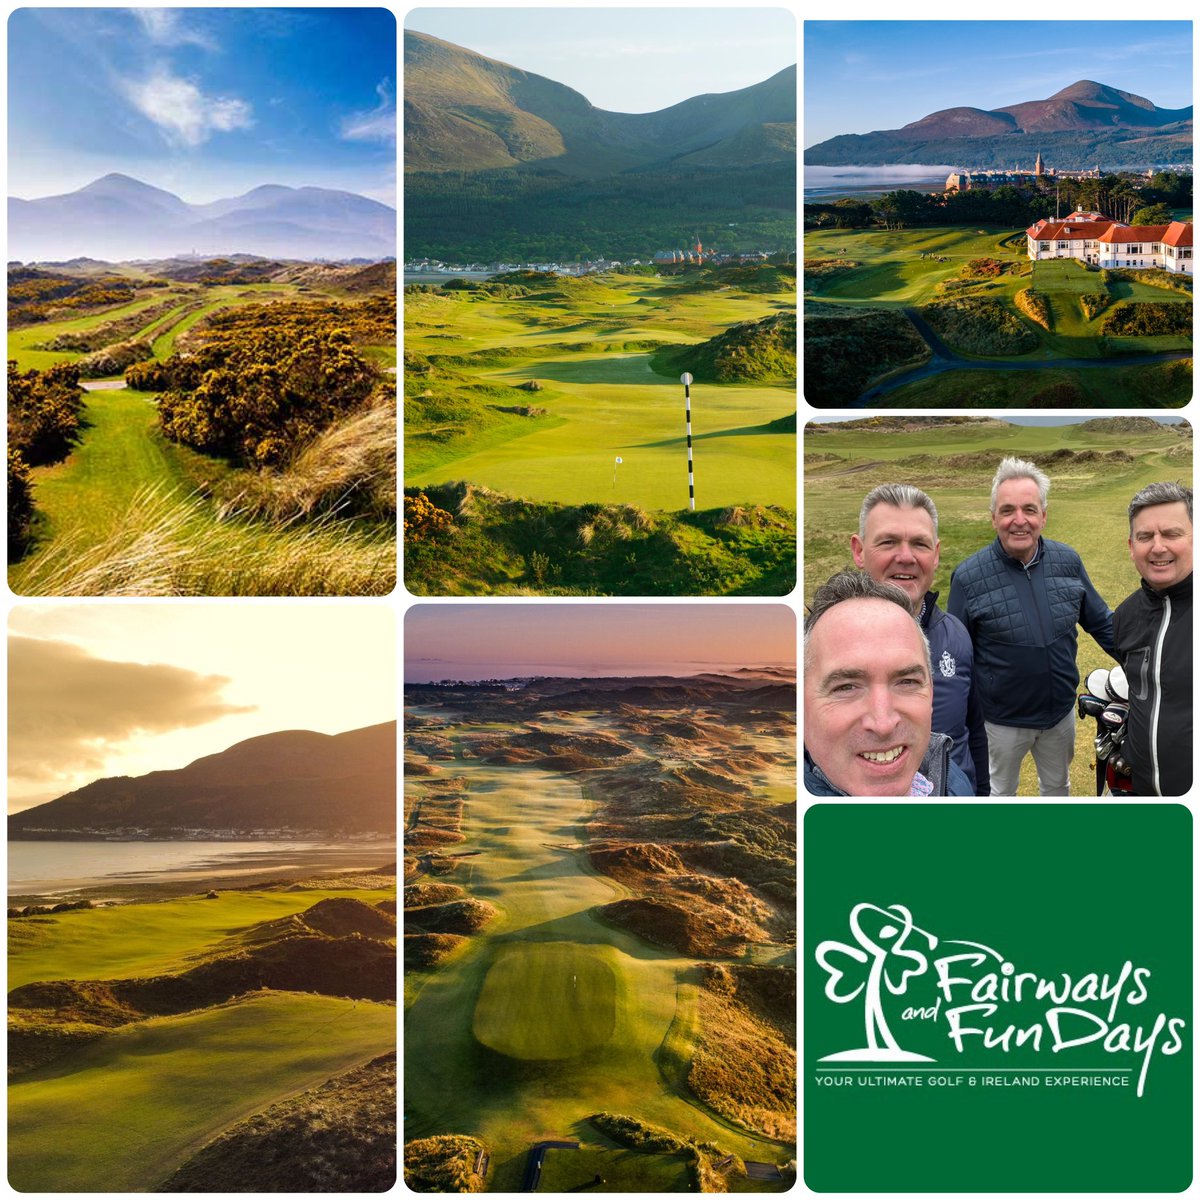 ⛳️ Presenting the resplendent Royal County Down Golf Club ⛳️ Not just one of the very best Links Golf Courses on planet earth, but when it comes to the Golf Experience they win hands down. A warm welcome awaits from Head Professional, @kevanwhitson and his amazing team.…